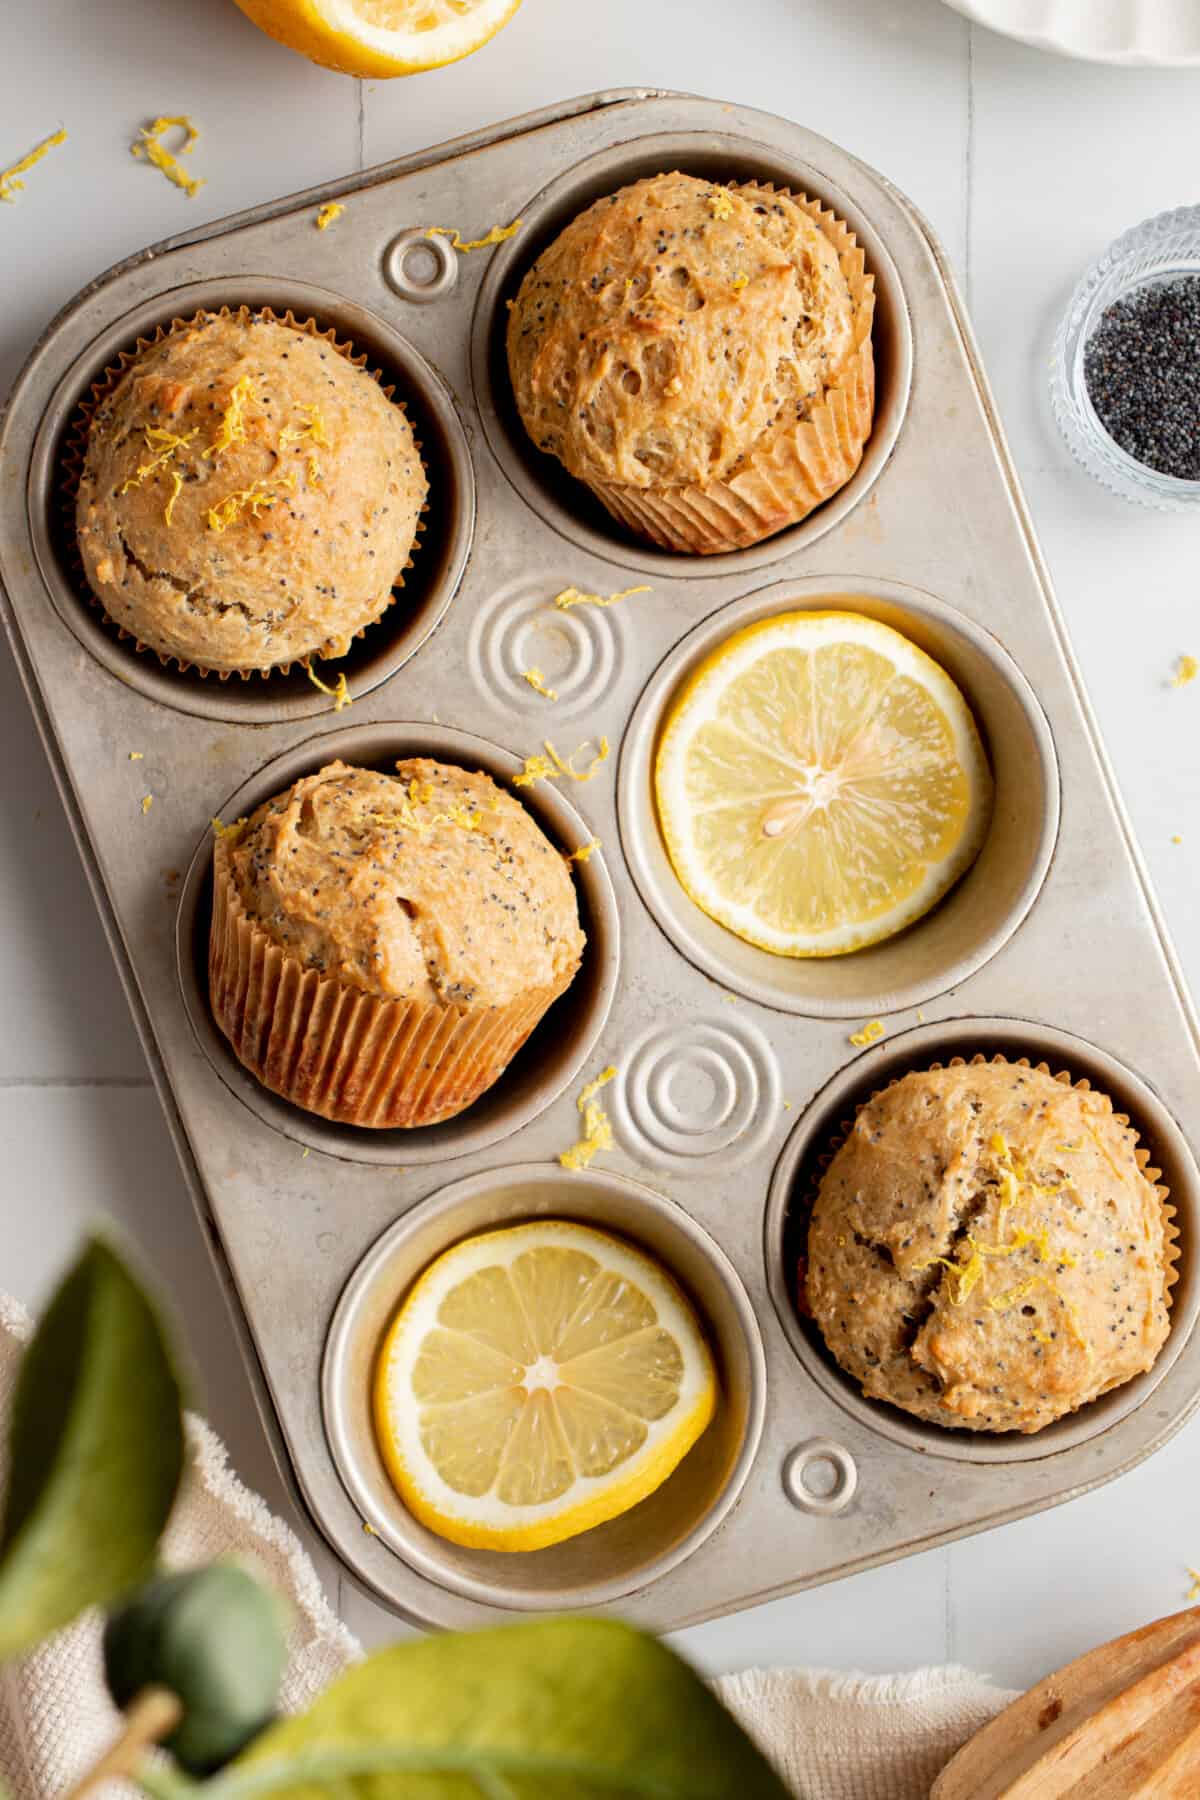 Lemon slices and lemon poppyseed muffins in a muffin tin.